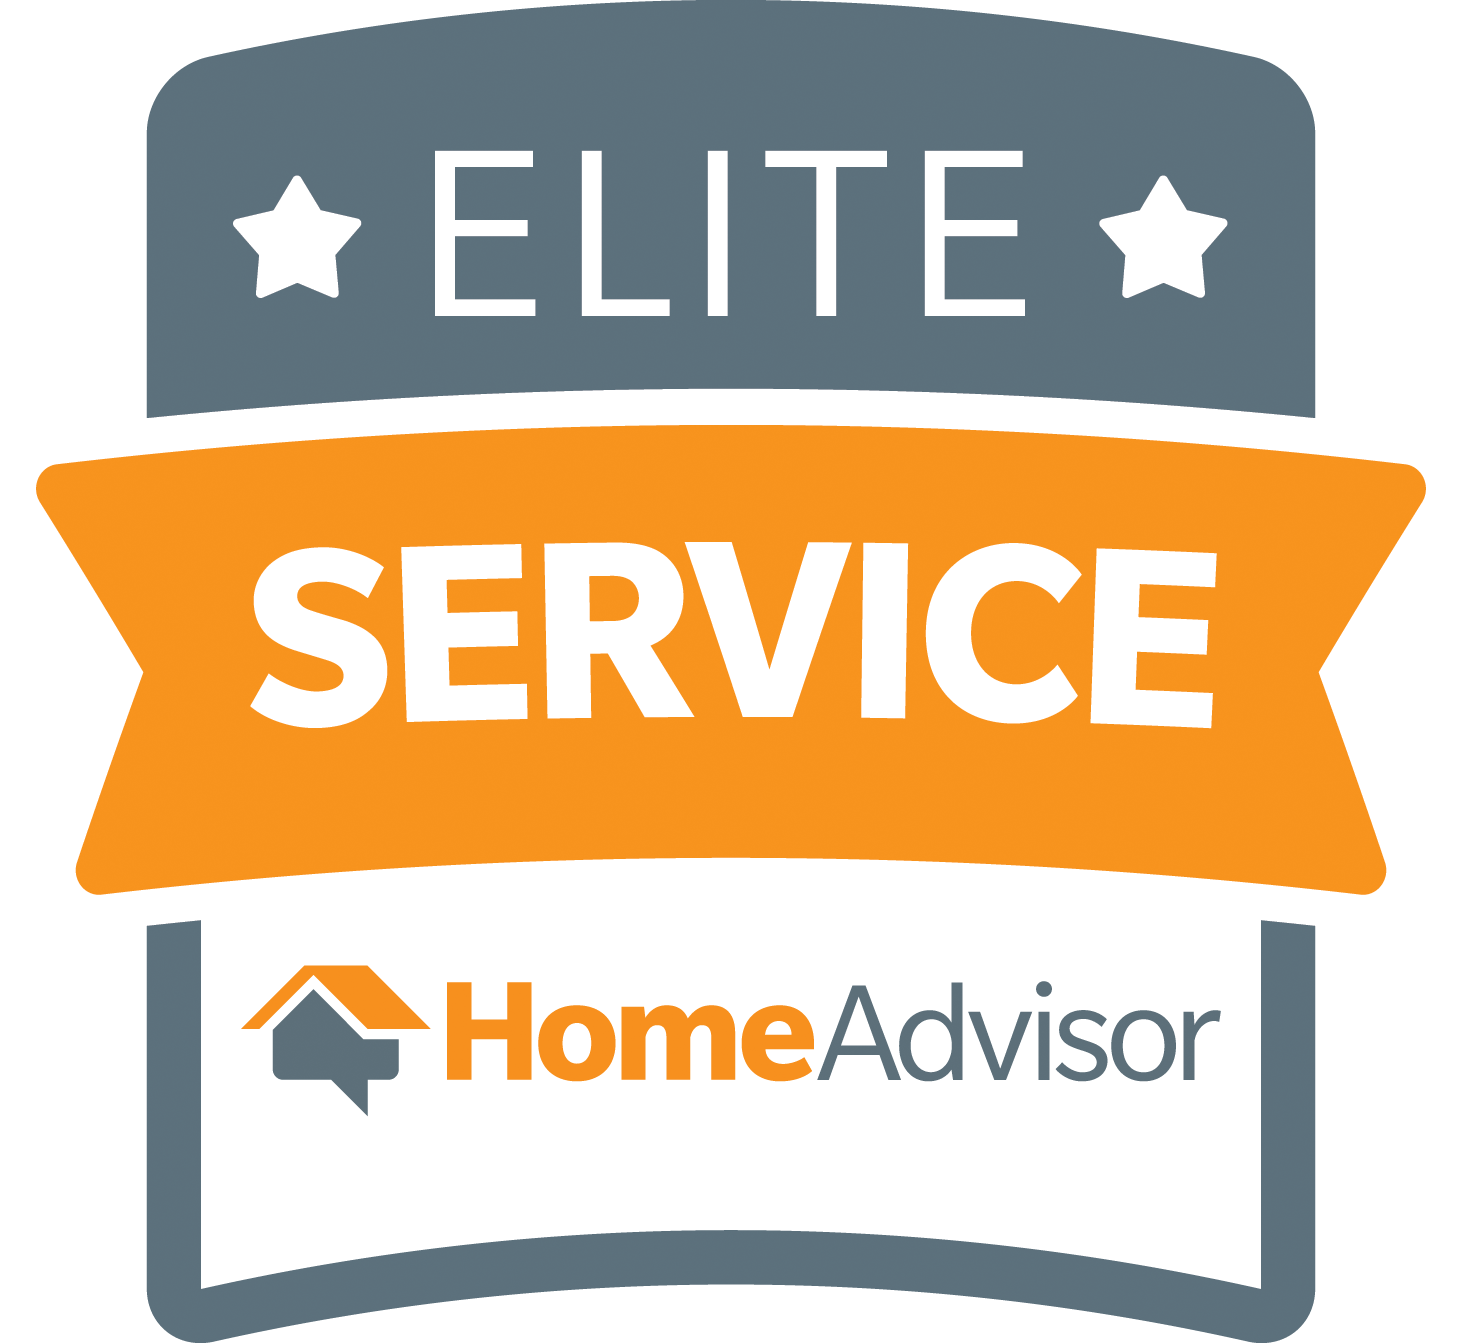 River City Pressure Washing Is an Elite Service provider for Home Advisor in Central Illinois